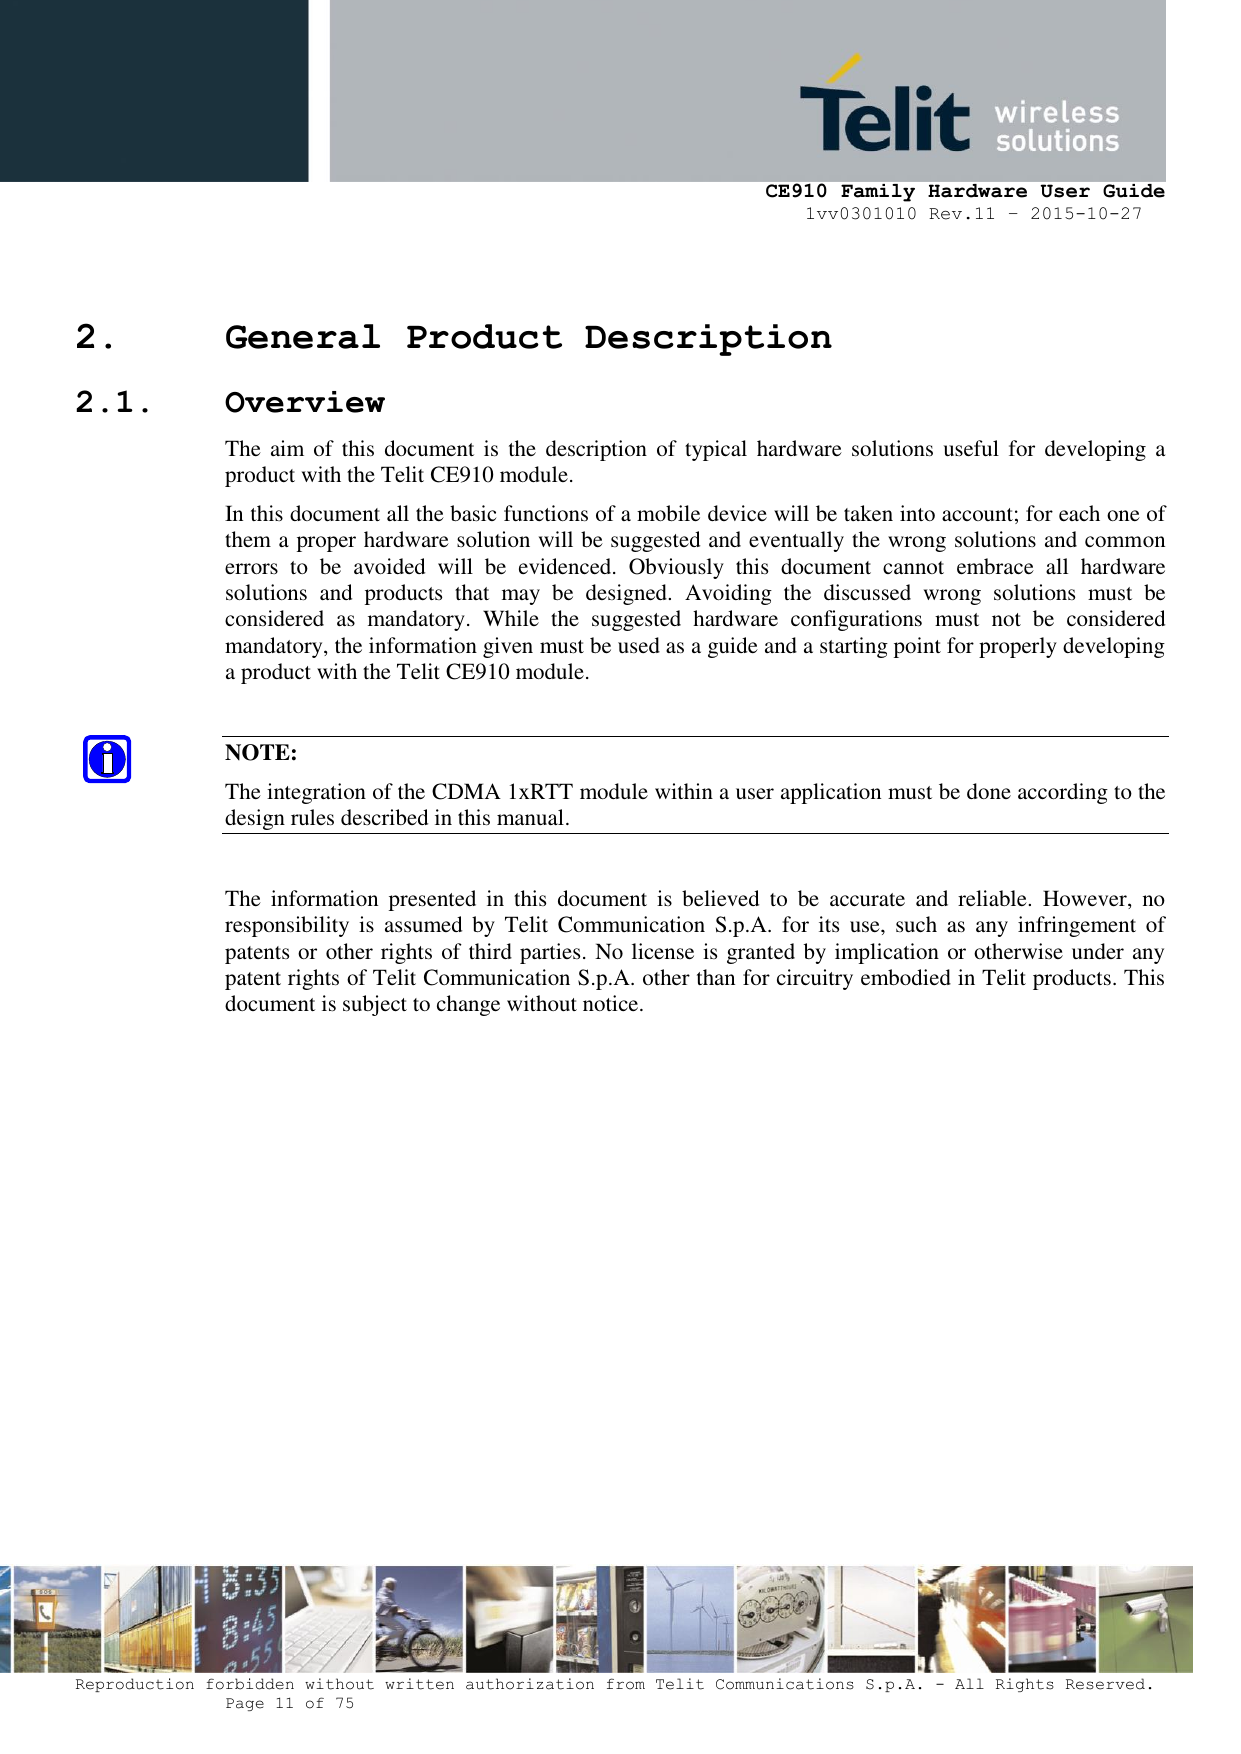     CE910 Family Hardware User Guide 1vv0301010 Rev.11 – 2015-10-27 Reproduction forbidden without written authorization from Telit Communications S.p.A. - All Rights Reserved.    Page 11 of 75                                                     2. General Product Description 2.1. Overview The aim of  this  document is  the  description of  typical  hardware solutions useful for  developing a product with the Telit CE910 module. In this document all the basic functions of a mobile device will be taken into account; for each one of them a proper hardware solution will be suggested and eventually the wrong solutions and common errors  to  be  avoided  will  be  evidenced.  Obviously  this  document  cannot  embrace  all  hardware solutions  and  products  that  may  be  designed.  Avoiding  the  discussed  wrong  solutions  must  be considered  as  mandatory.  While  the  suggested  hardware  configurations  must  not  be  considered mandatory, the information given must be used as a guide and a starting point for properly developing a product with the Telit CE910 module.  NOTE: The integration of the CDMA 1xRTT module within a user application must be done according to the design rules described in this manual.  The  information  presented  in  this  document  is  believed  to  be  accurate  and  reliable.  However,  no responsibility  is  assumed  by  Telit  Communication  S.p.A. for its  use,  such  as  any  infringement  of patents or other rights of third parties. No license is granted by implication or otherwise under any patent rights of Telit Communication S.p.A. other than for circuitry embodied in Telit products. This document is subject to change without notice.              